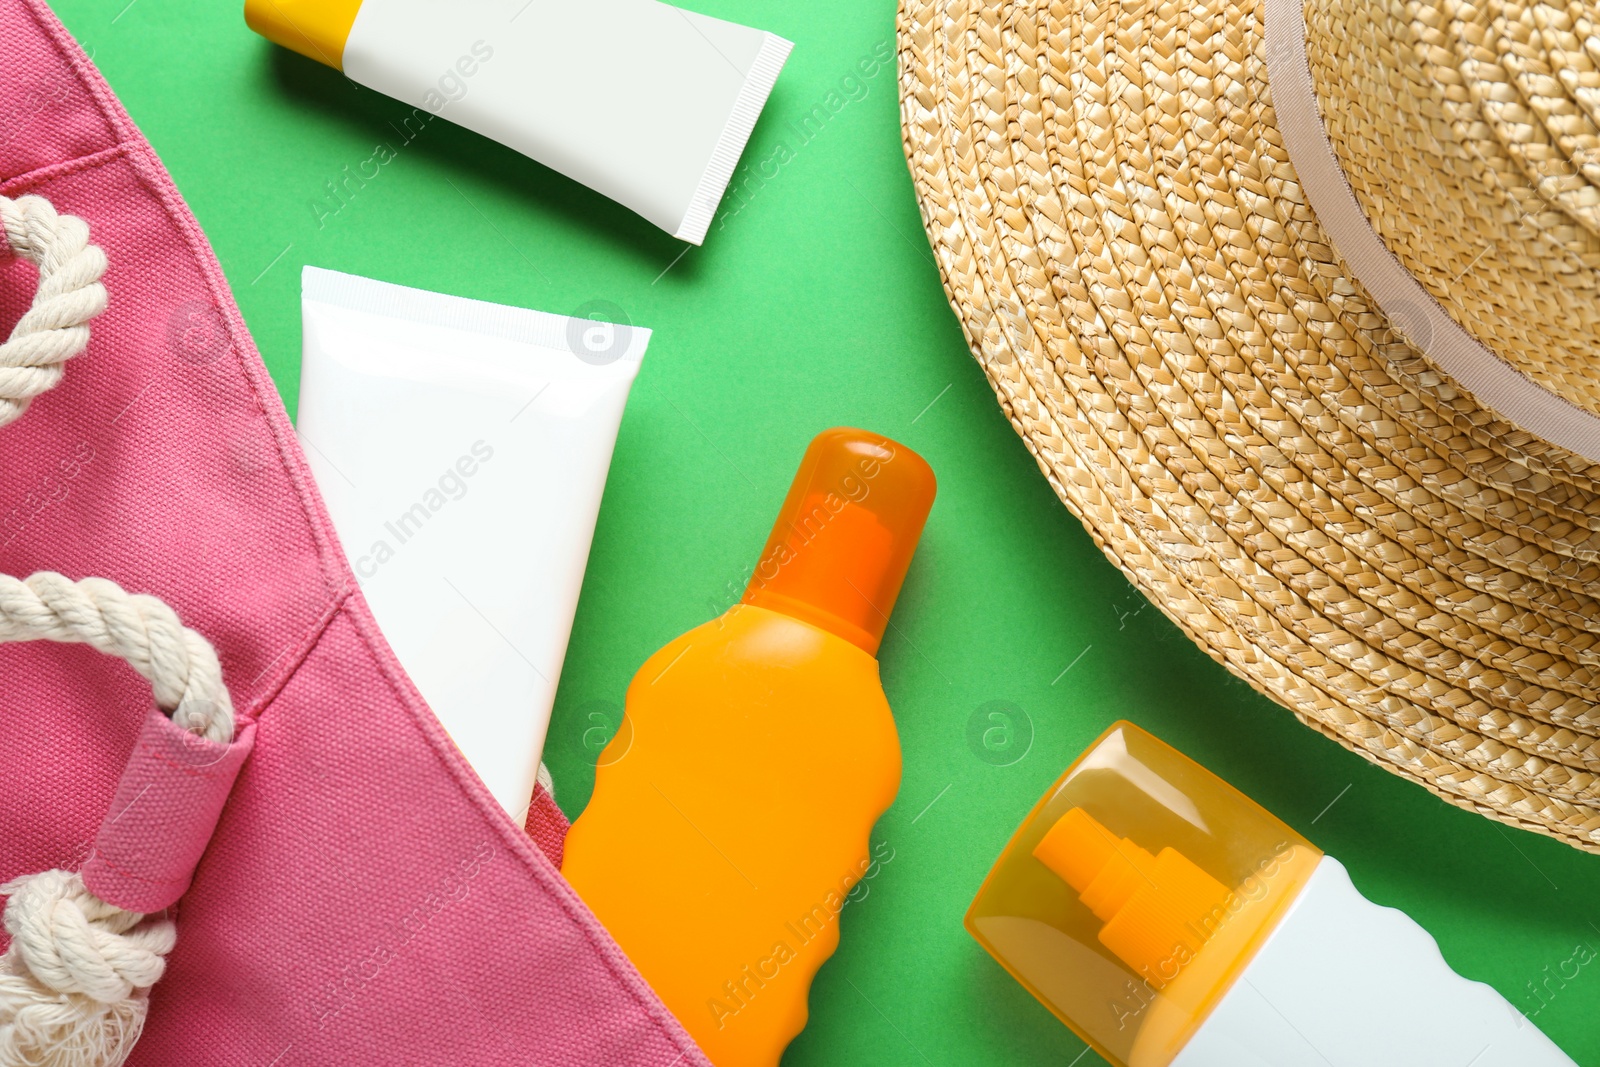 Photo of Suntan products, bag and straw hat on green background, flat lay